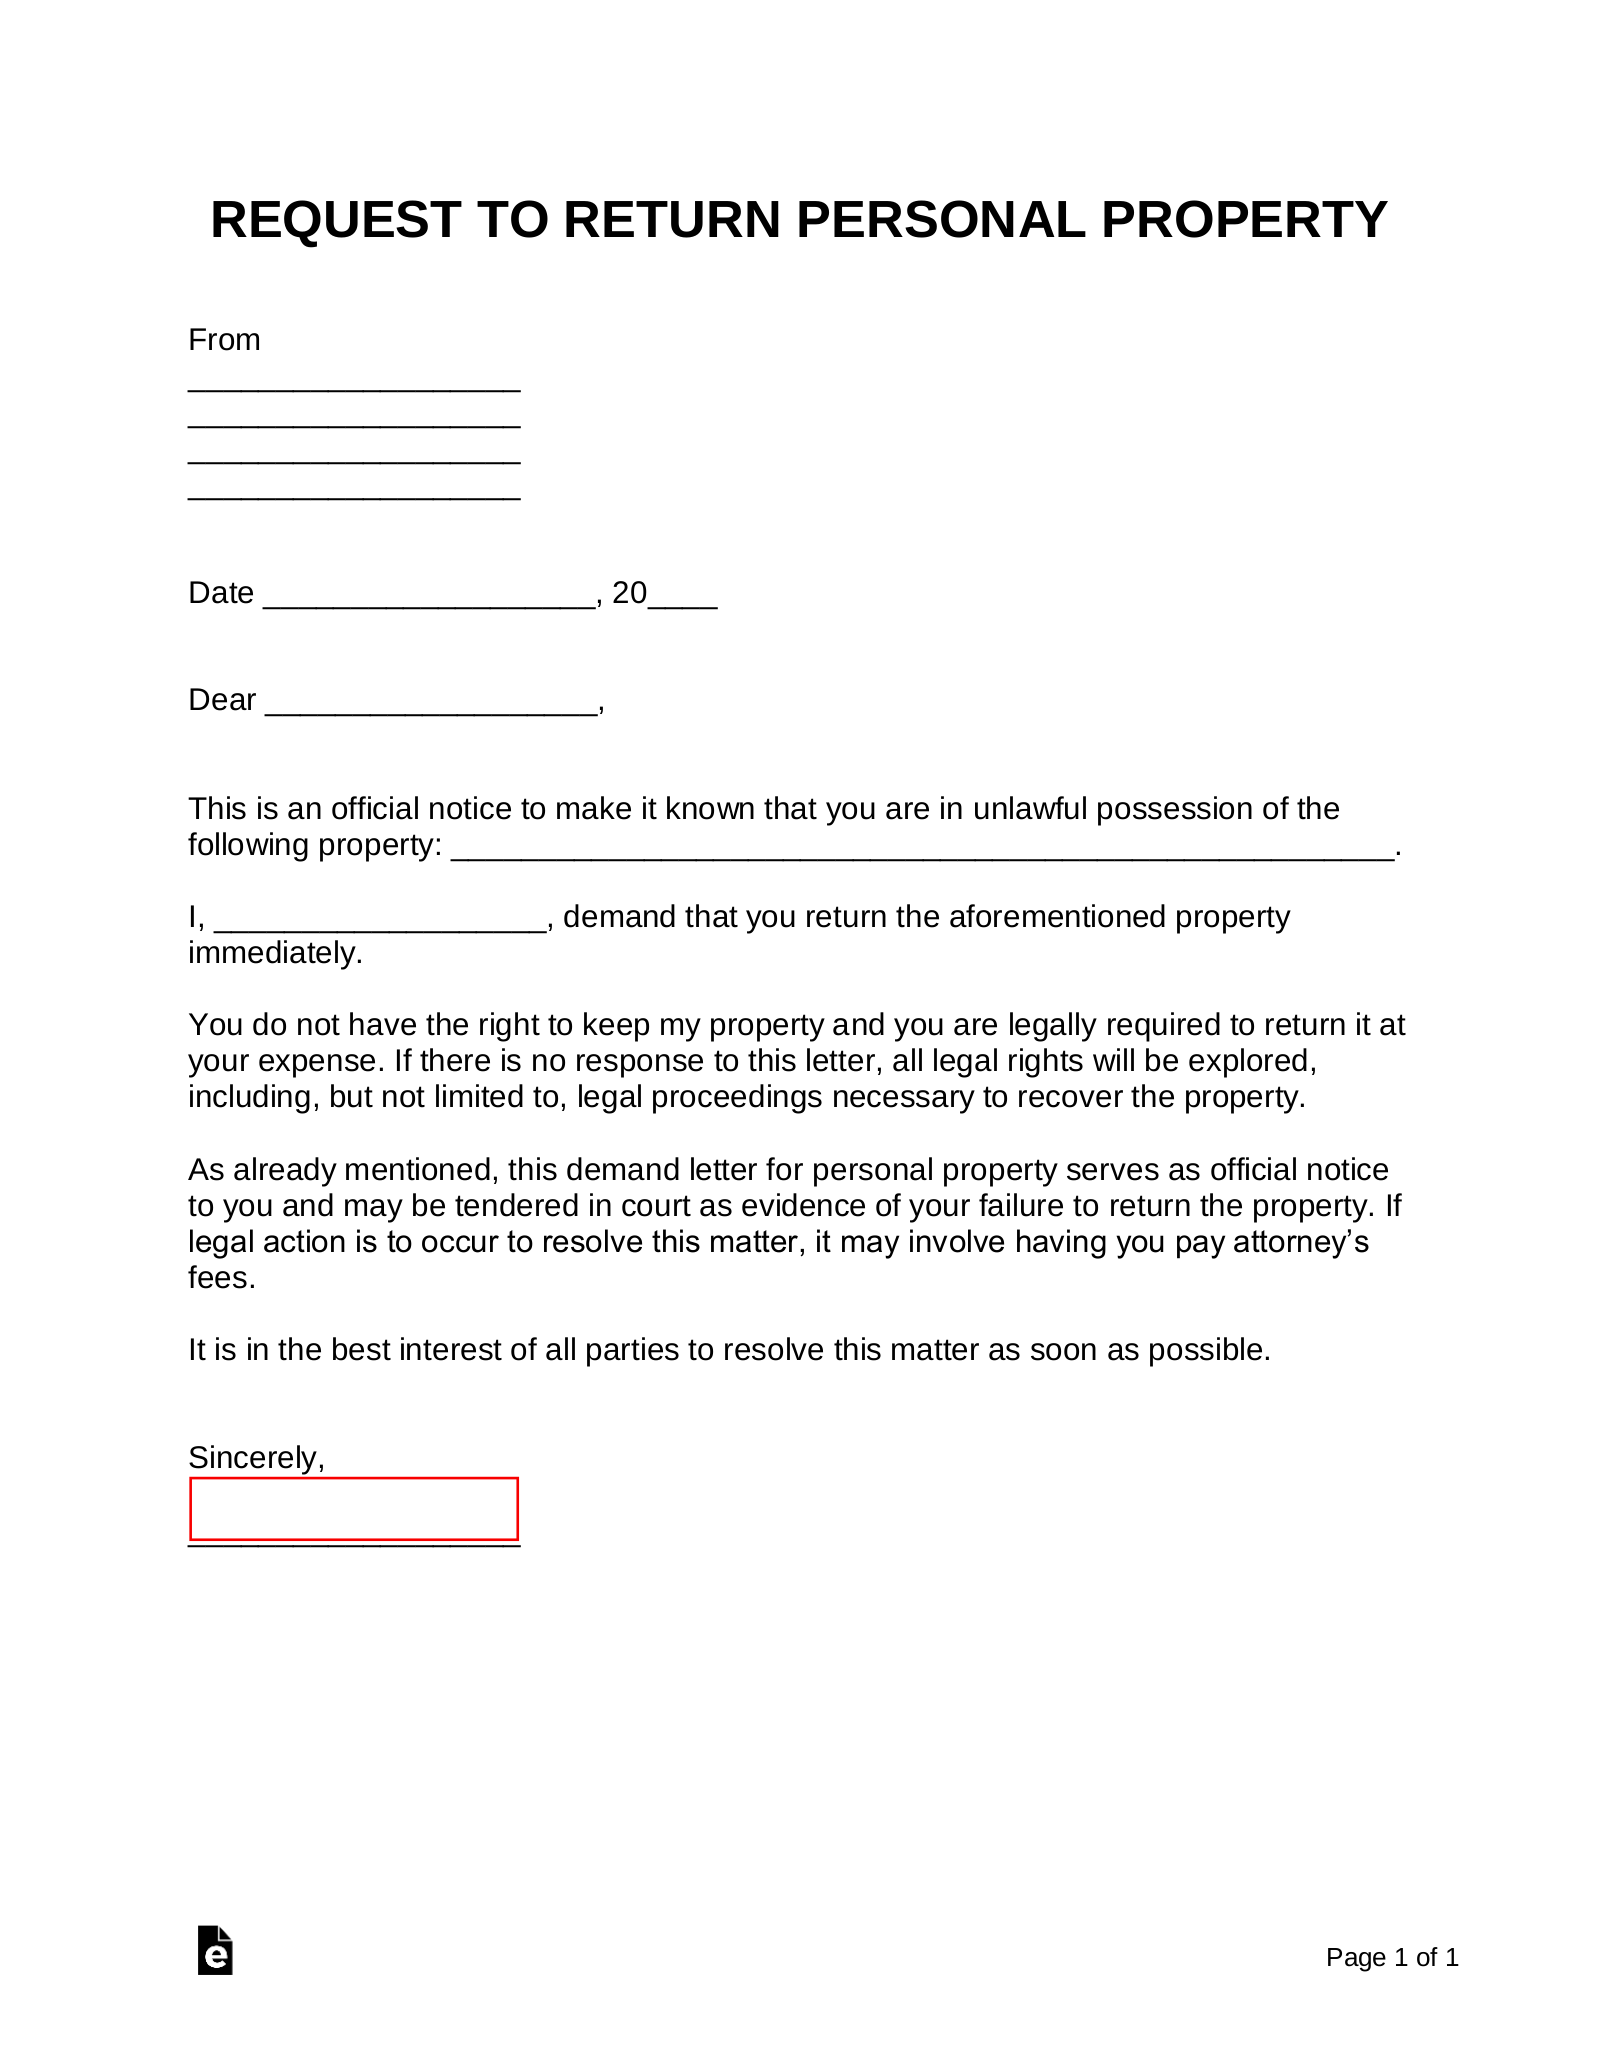 Sample Letter Requesting Return Of Personal Property from eforms.com